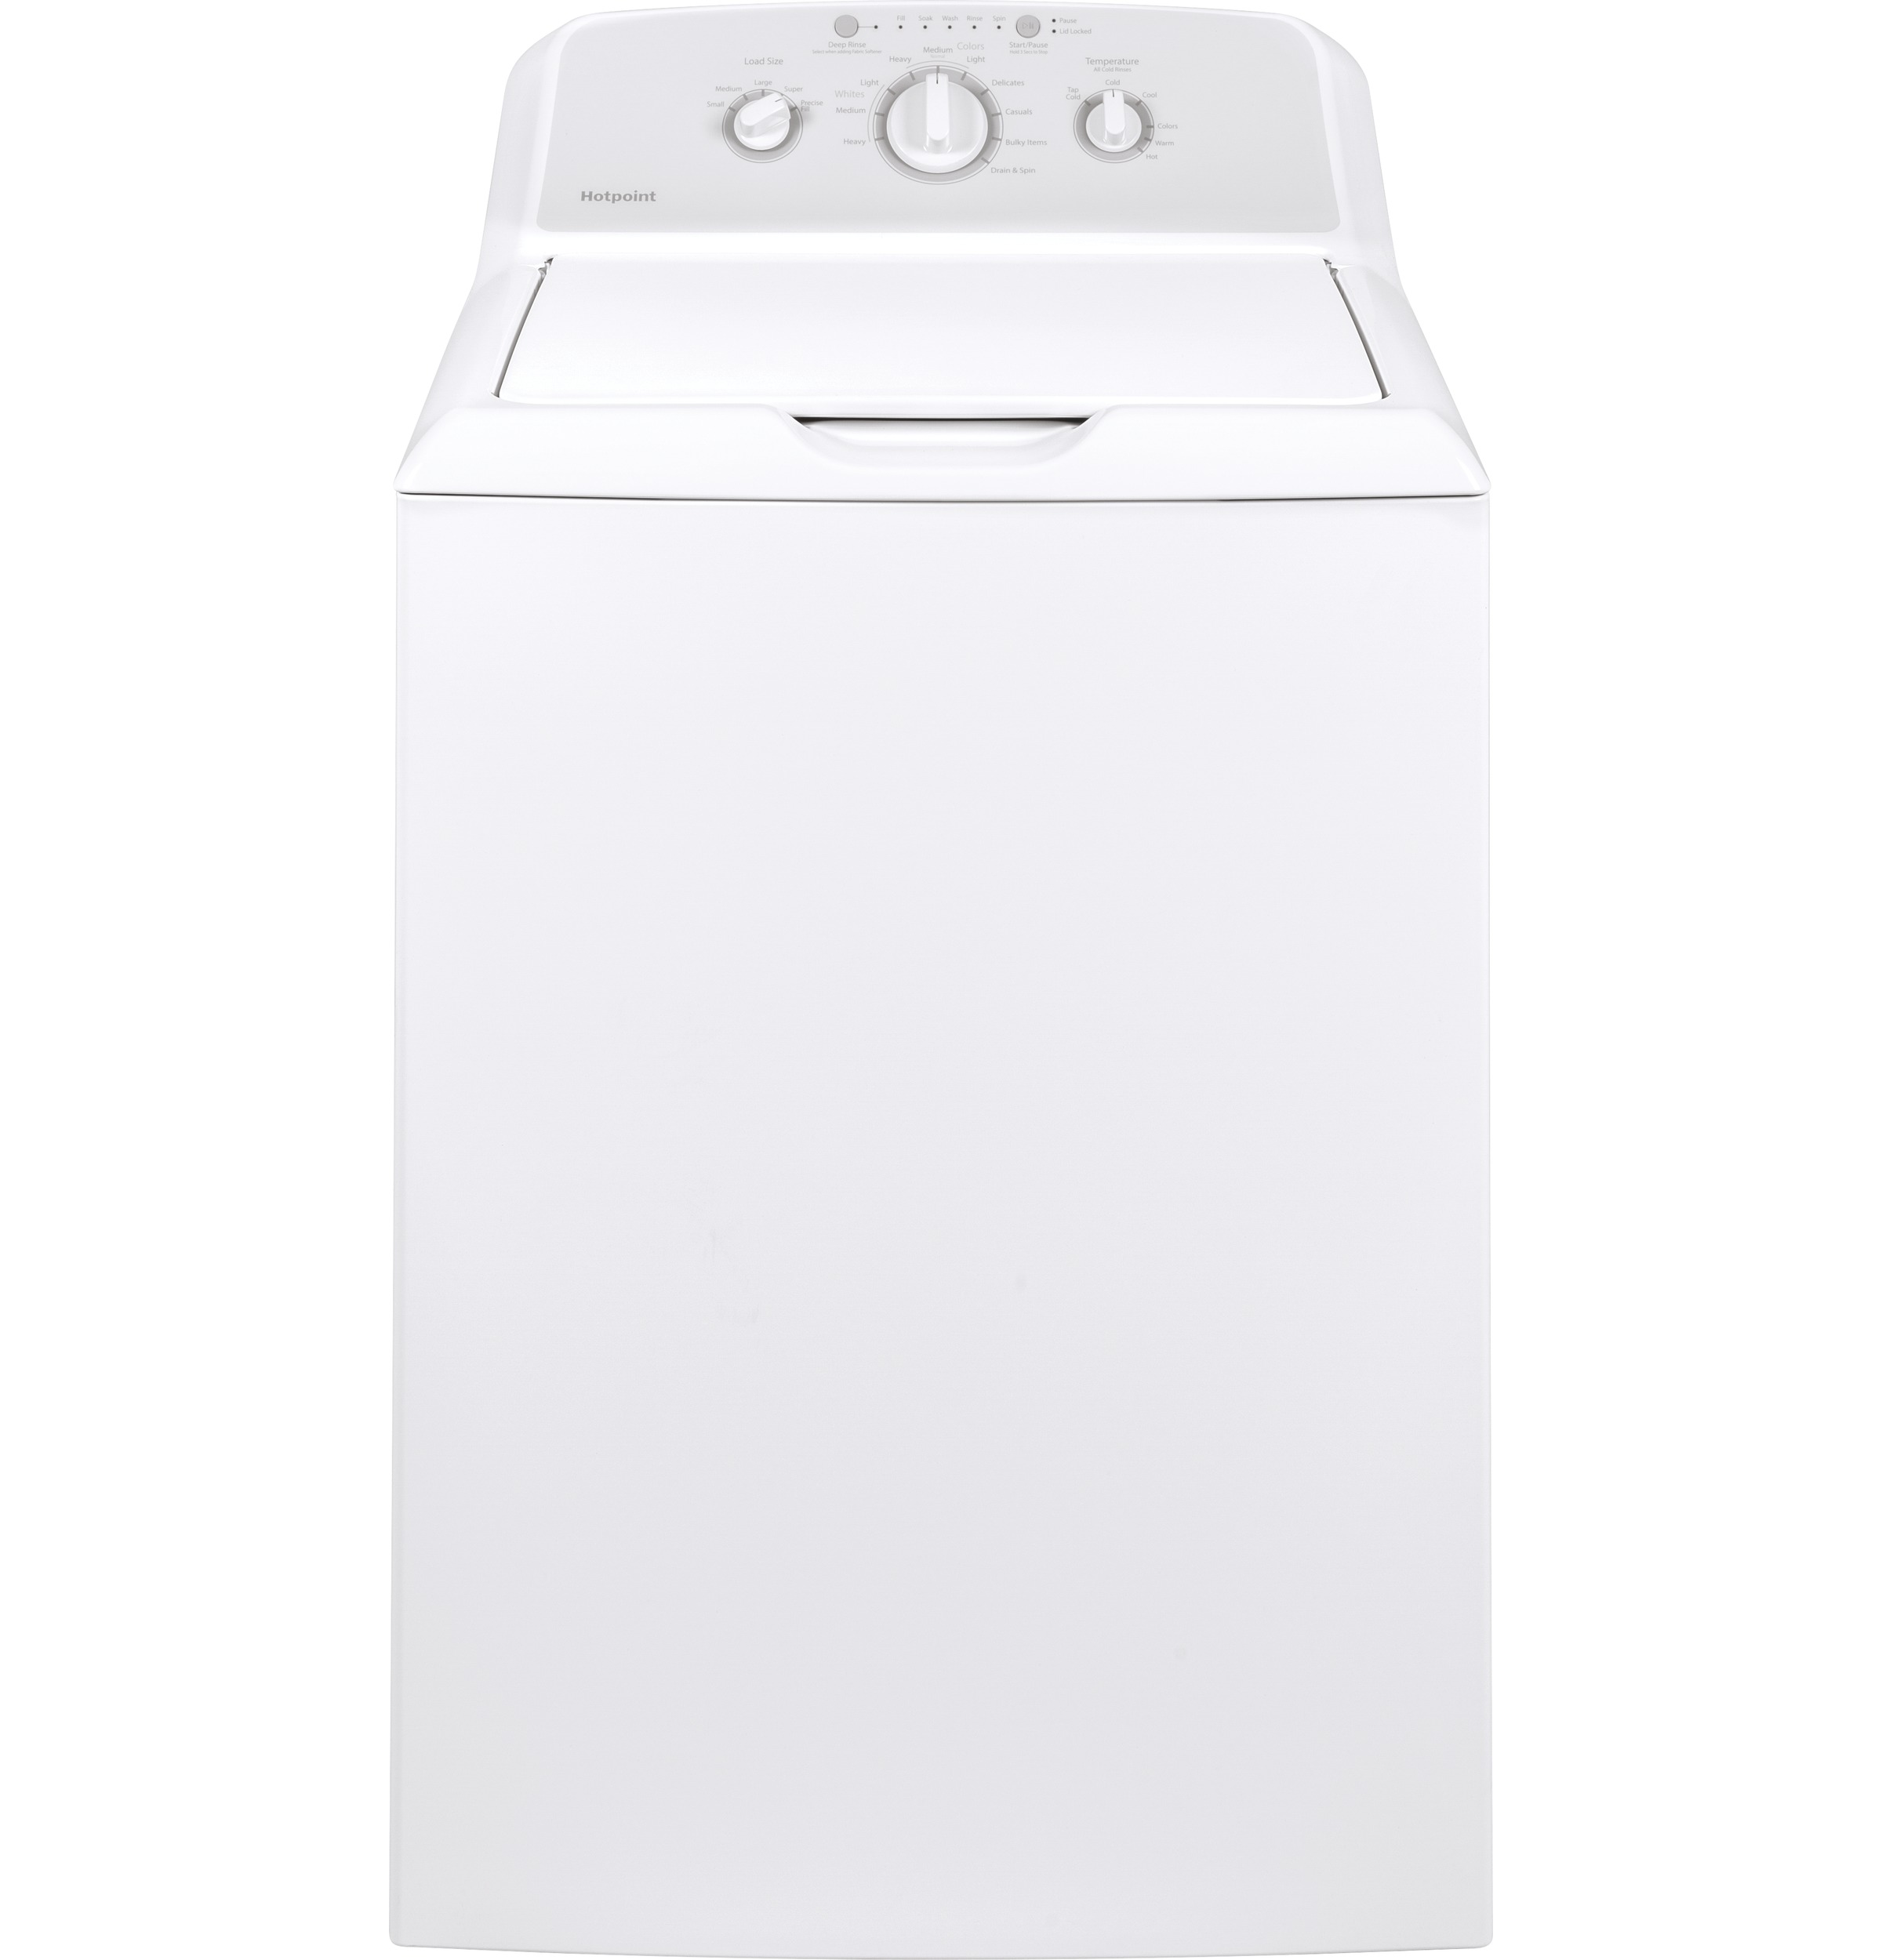 hotpoint-htw240askww-3-8-cu-ft-washer-with-stainless-steel-basket-white